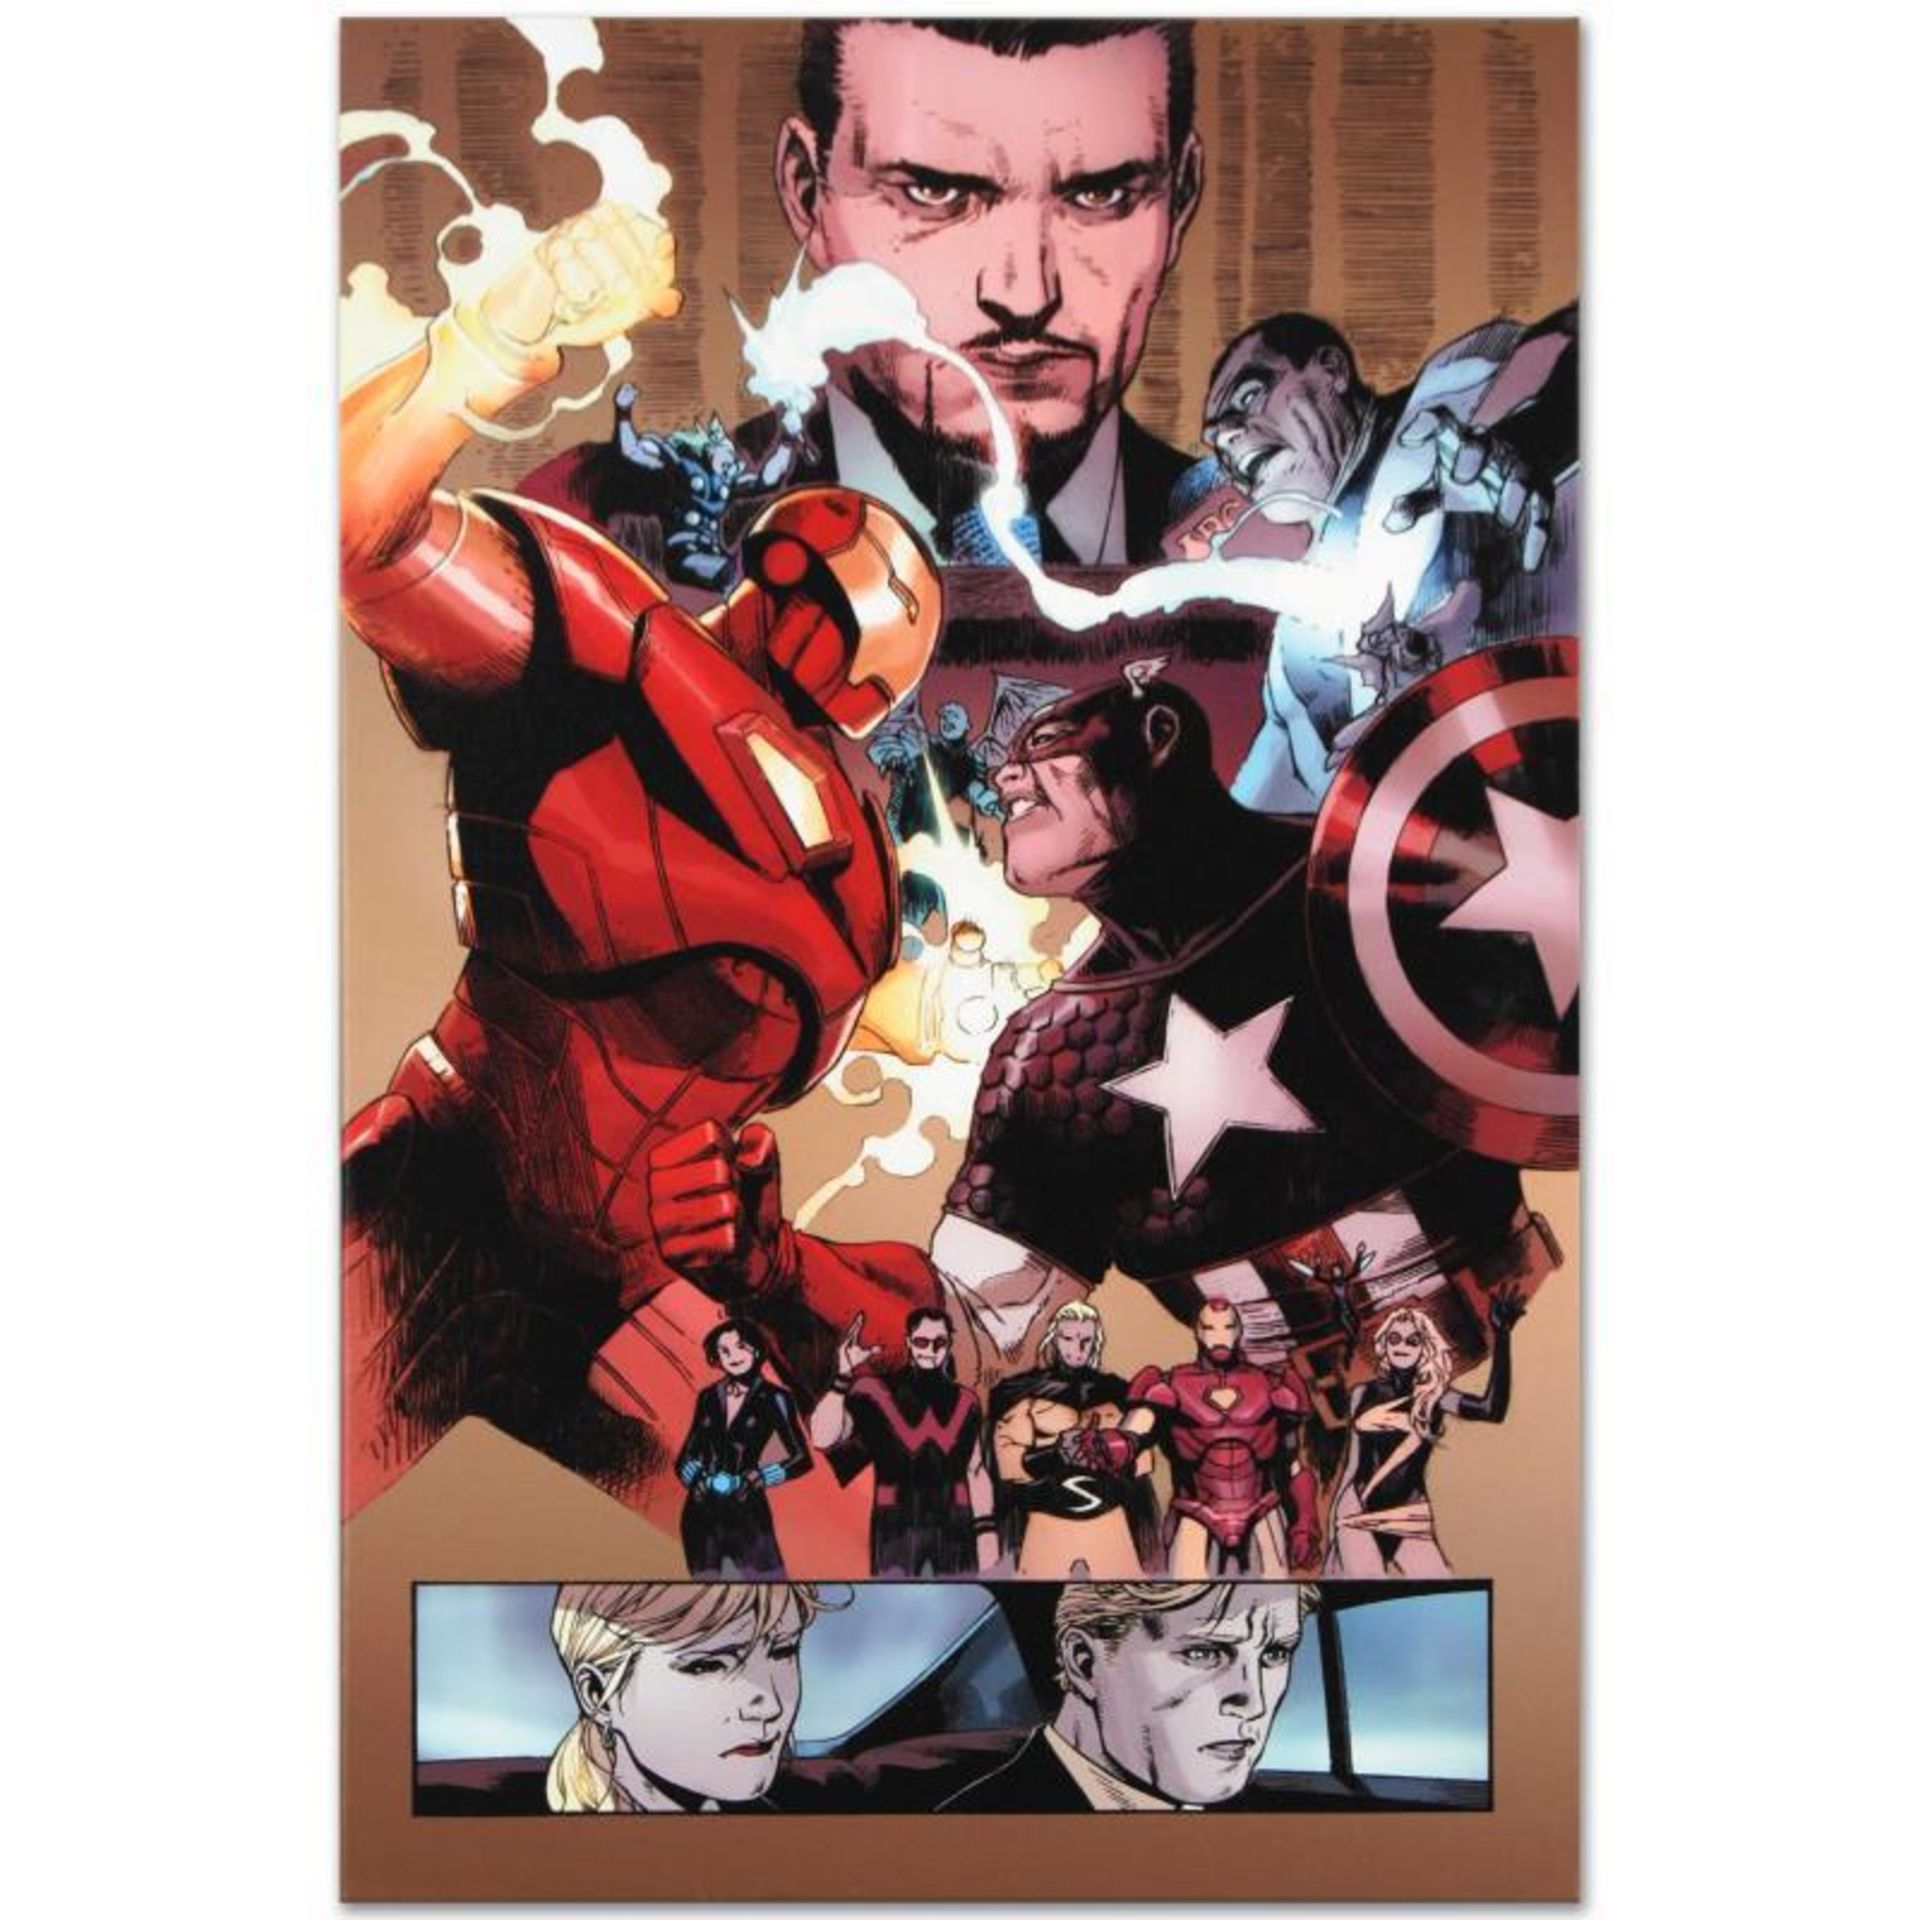 Marvel Comics "New Avengers #48" Numbered Limited Edition Giclee on Canvas by Bi